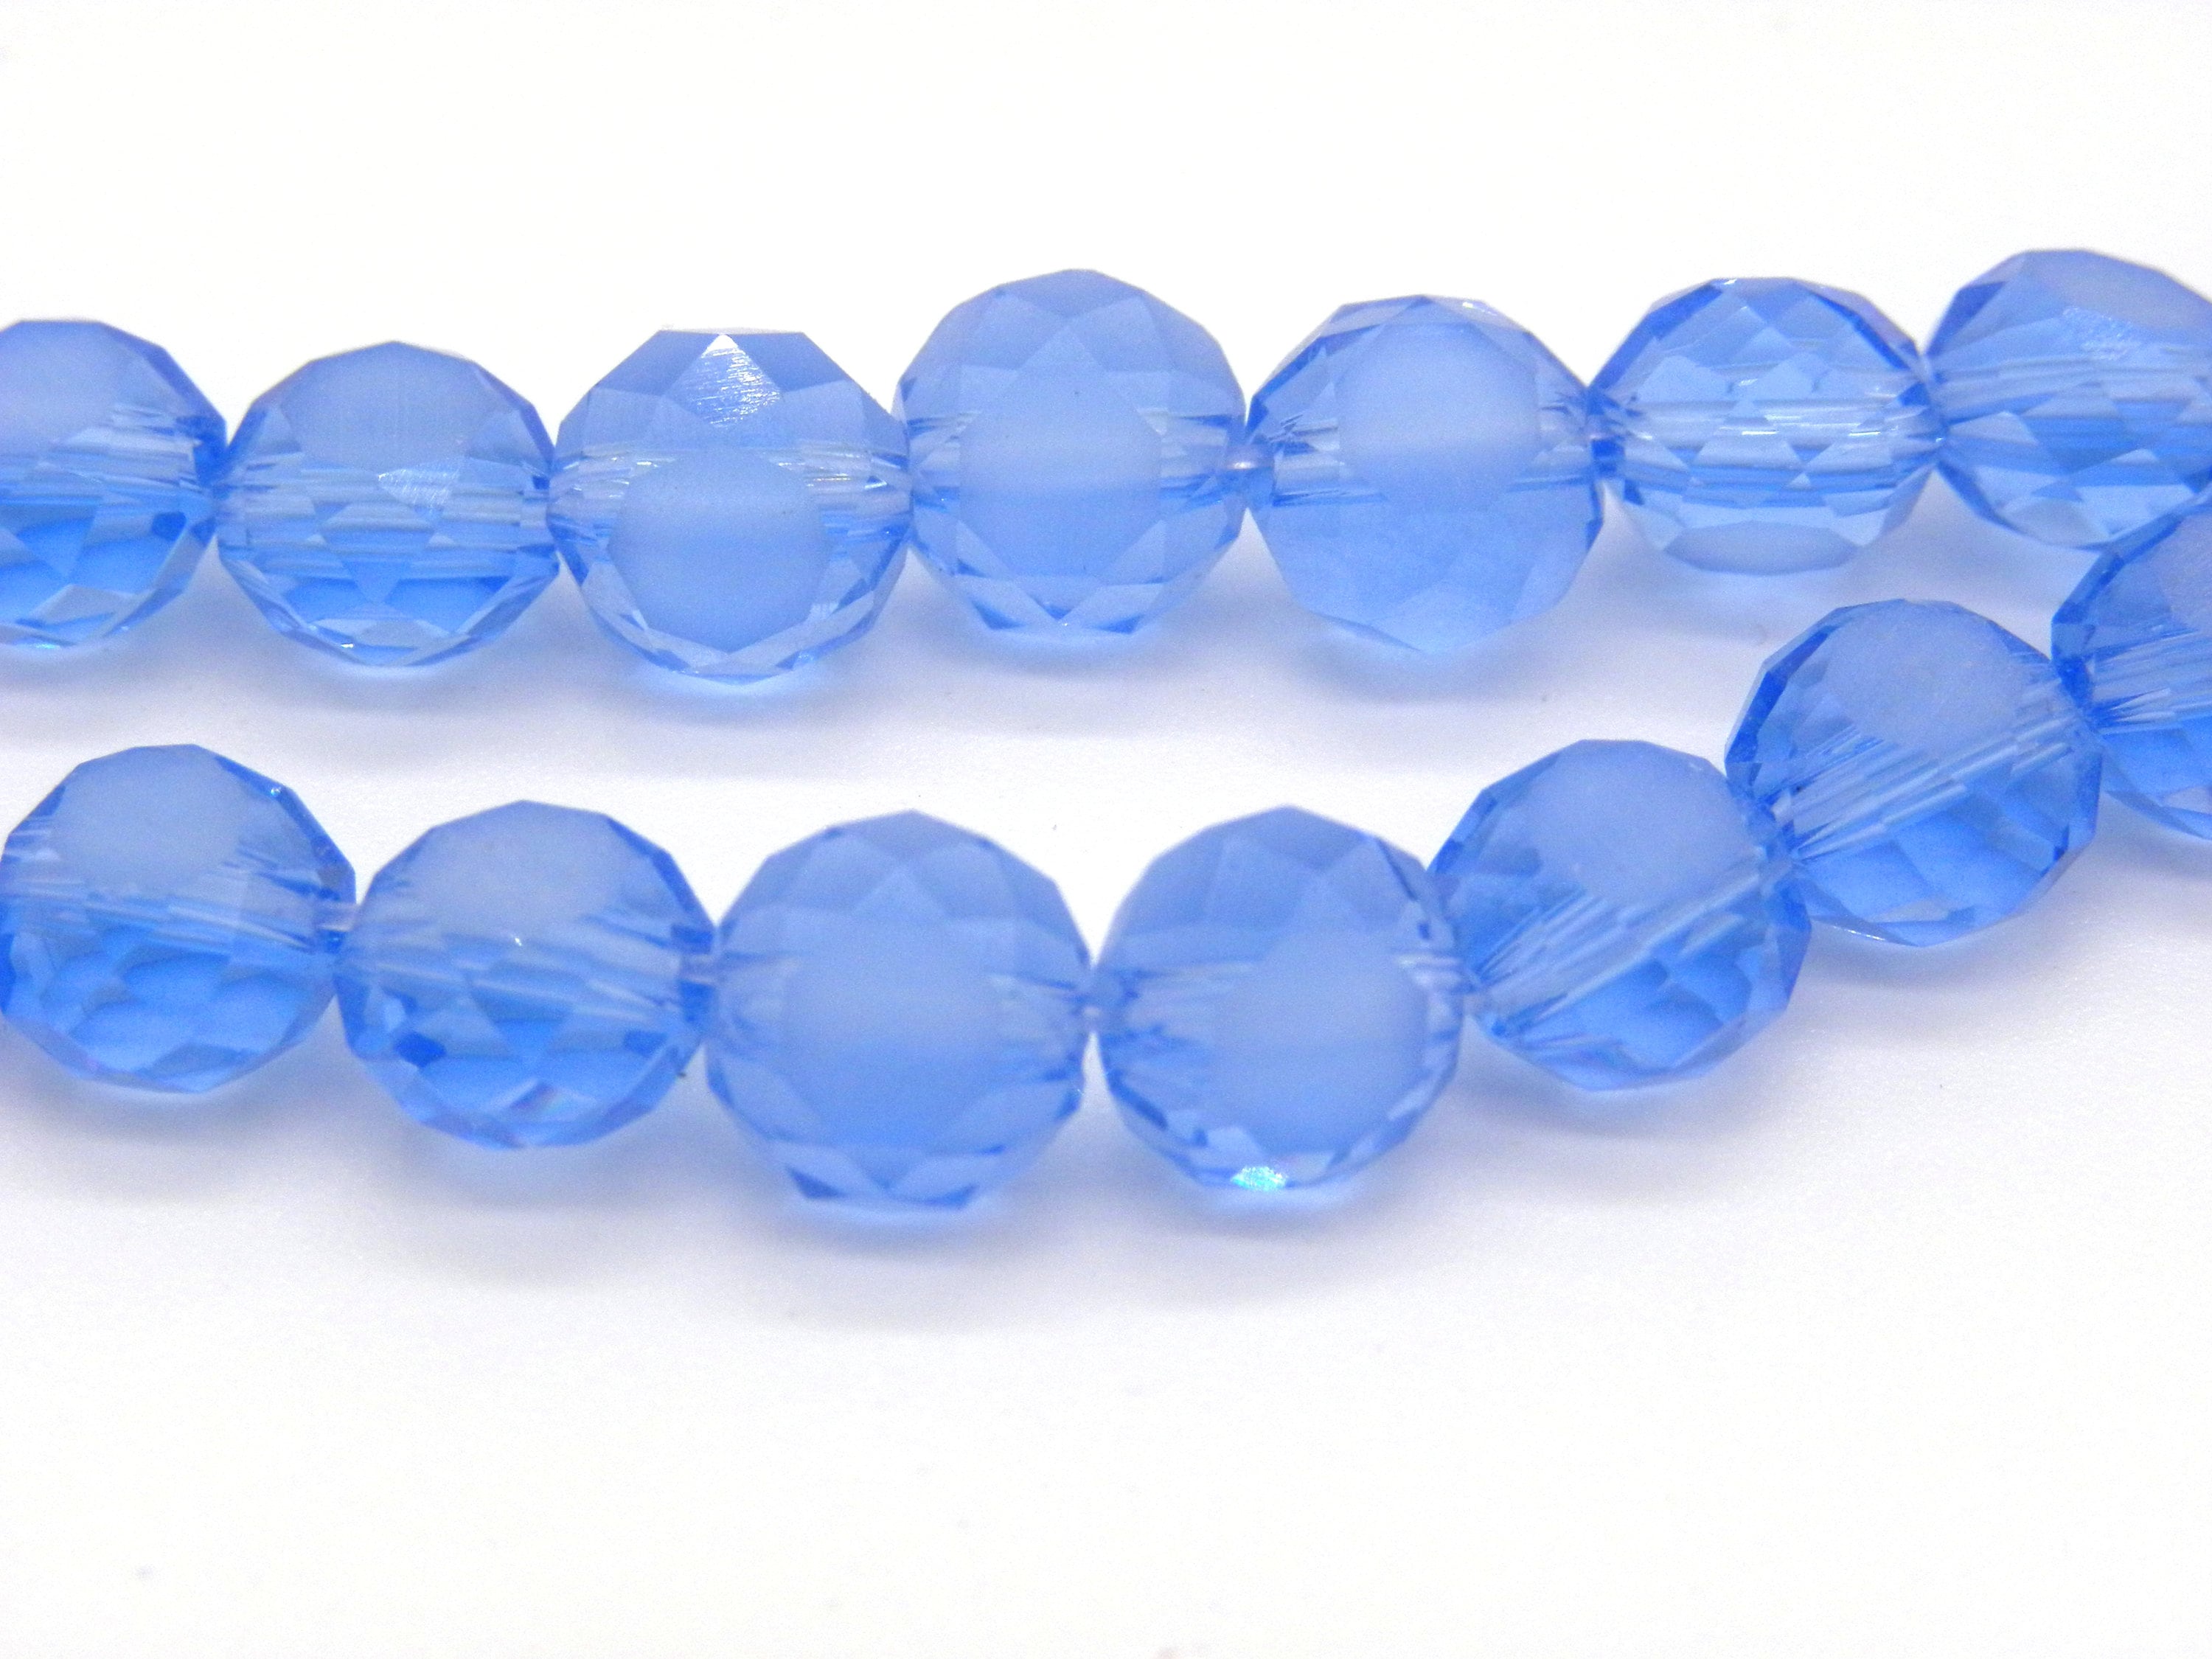 60 Turquoise Blue Faceted Round Glass Beads 6mm Translucent Faceted Blue Clear Round Shiny Faceted Blue Glass Crystal Beads Turquoise #S3302